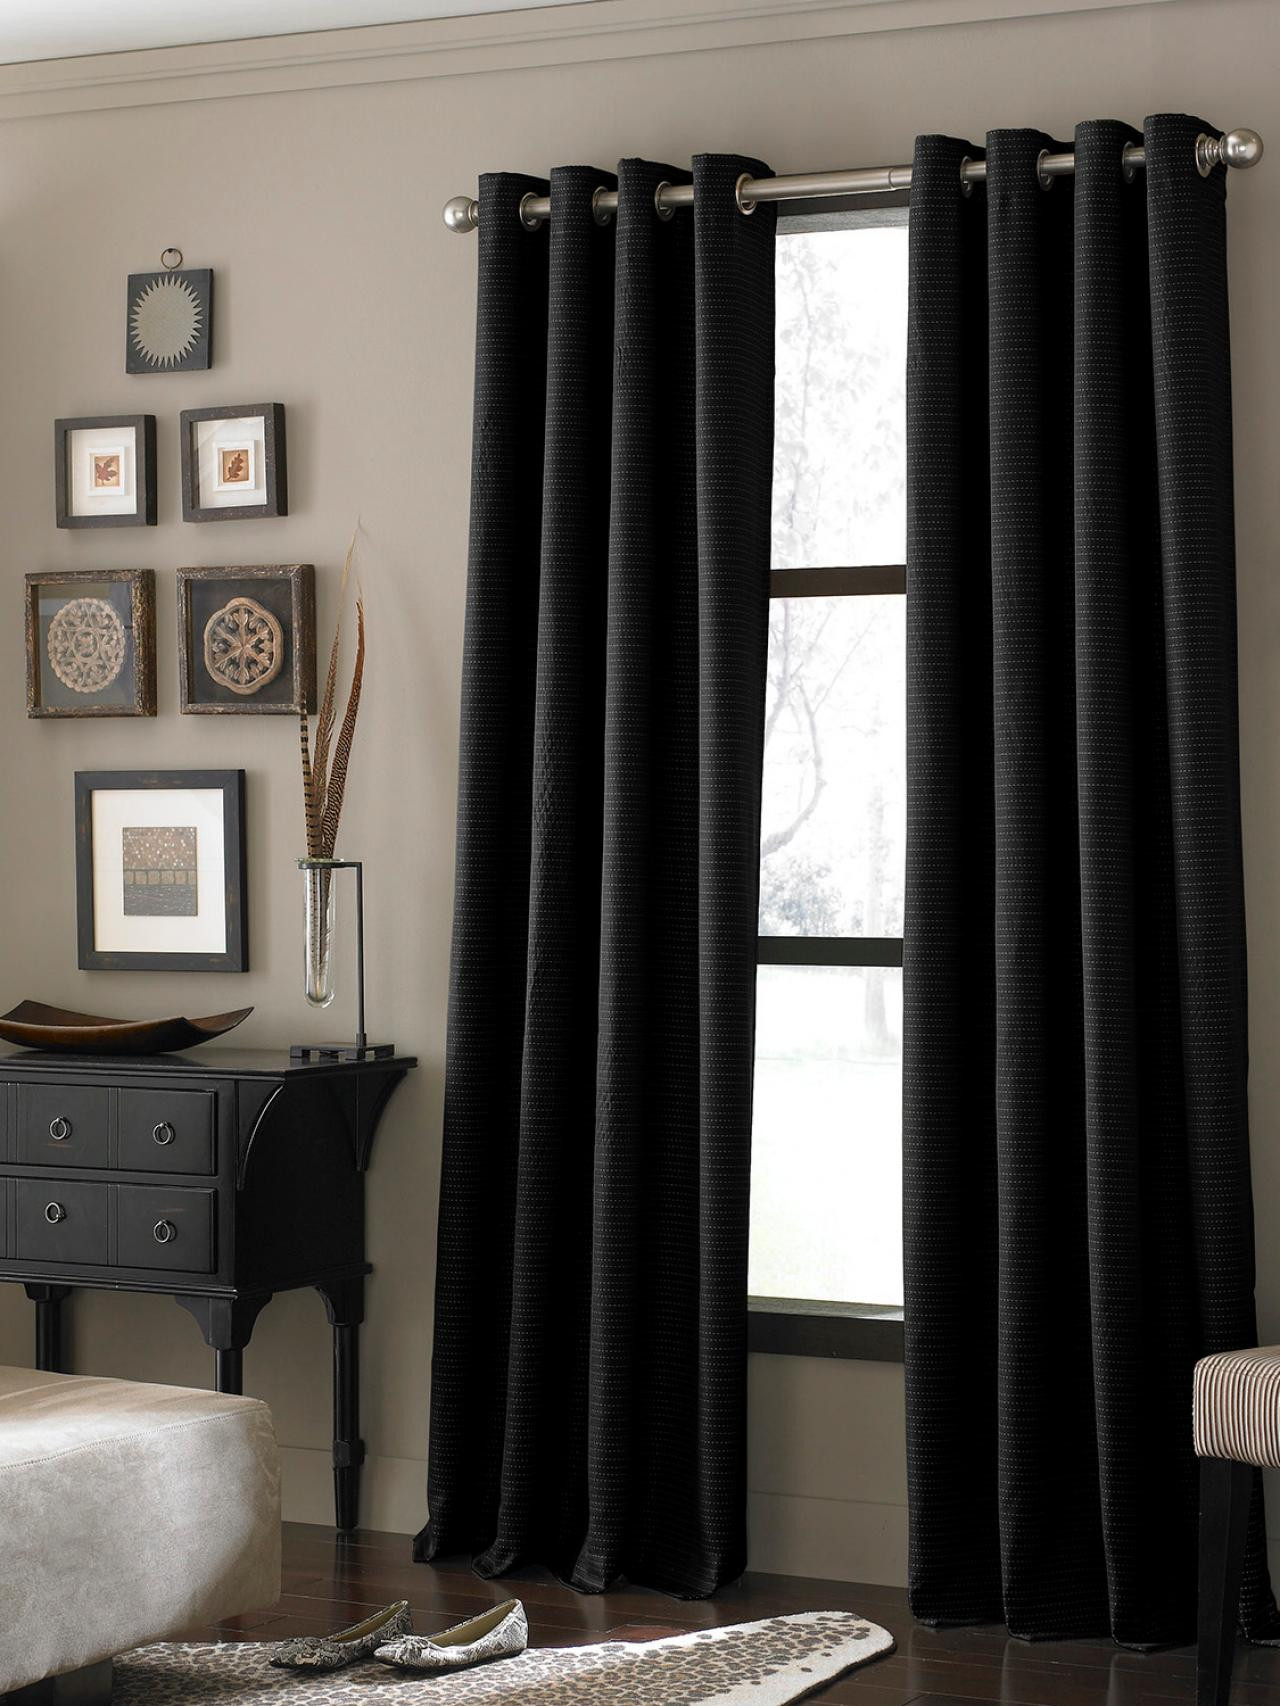 Black Living Room Curtains
 20 Different Living Room Window Treatments